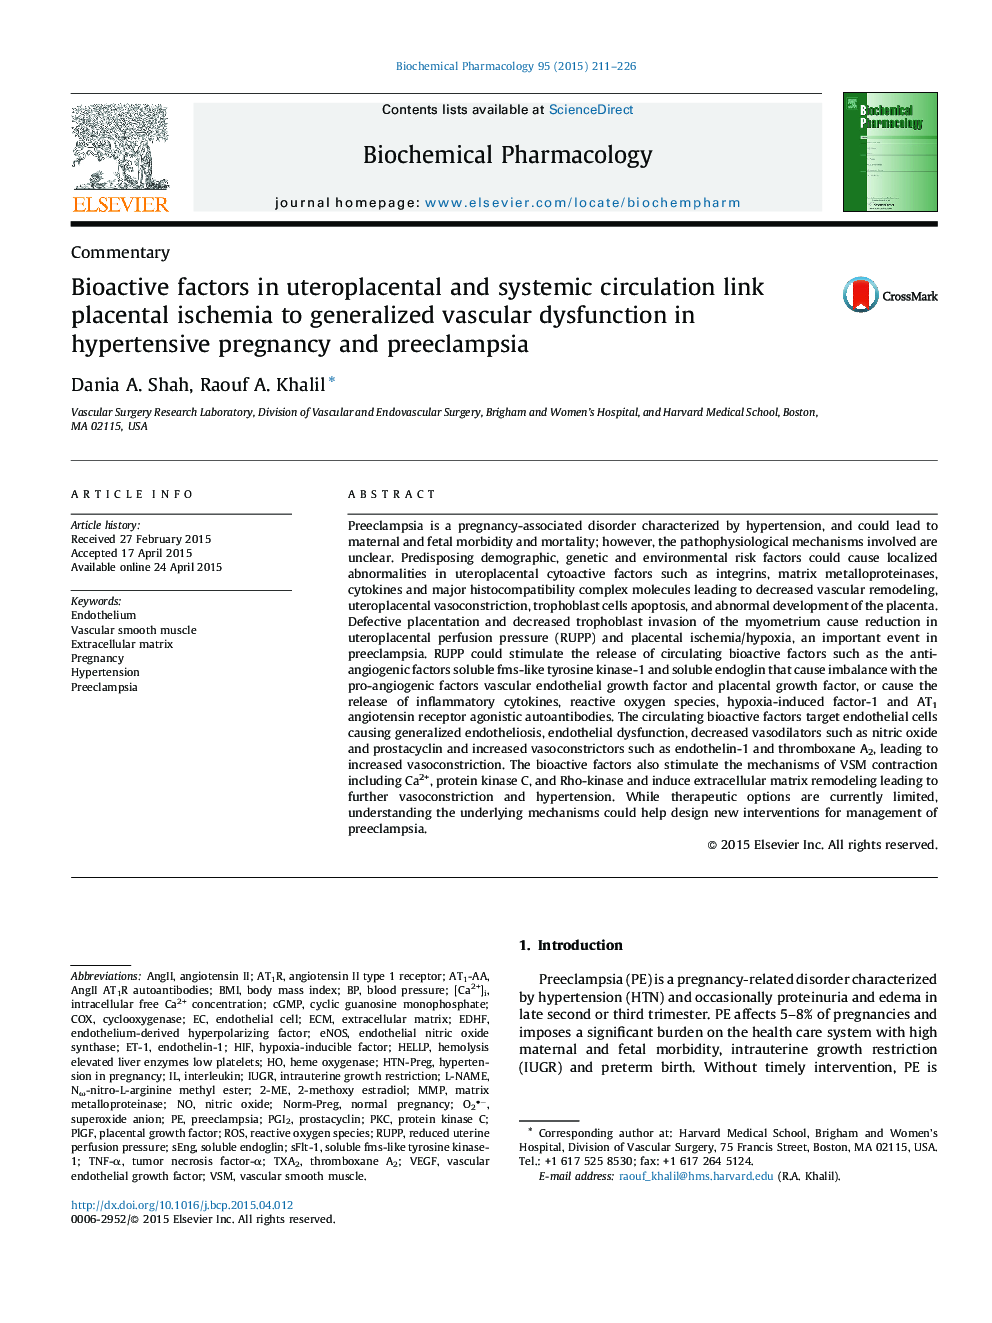 Bioactive factors in uteroplacental and systemic circulation link placental ischemia to generalized vascular dysfunction in hypertensive pregnancy and preeclampsia